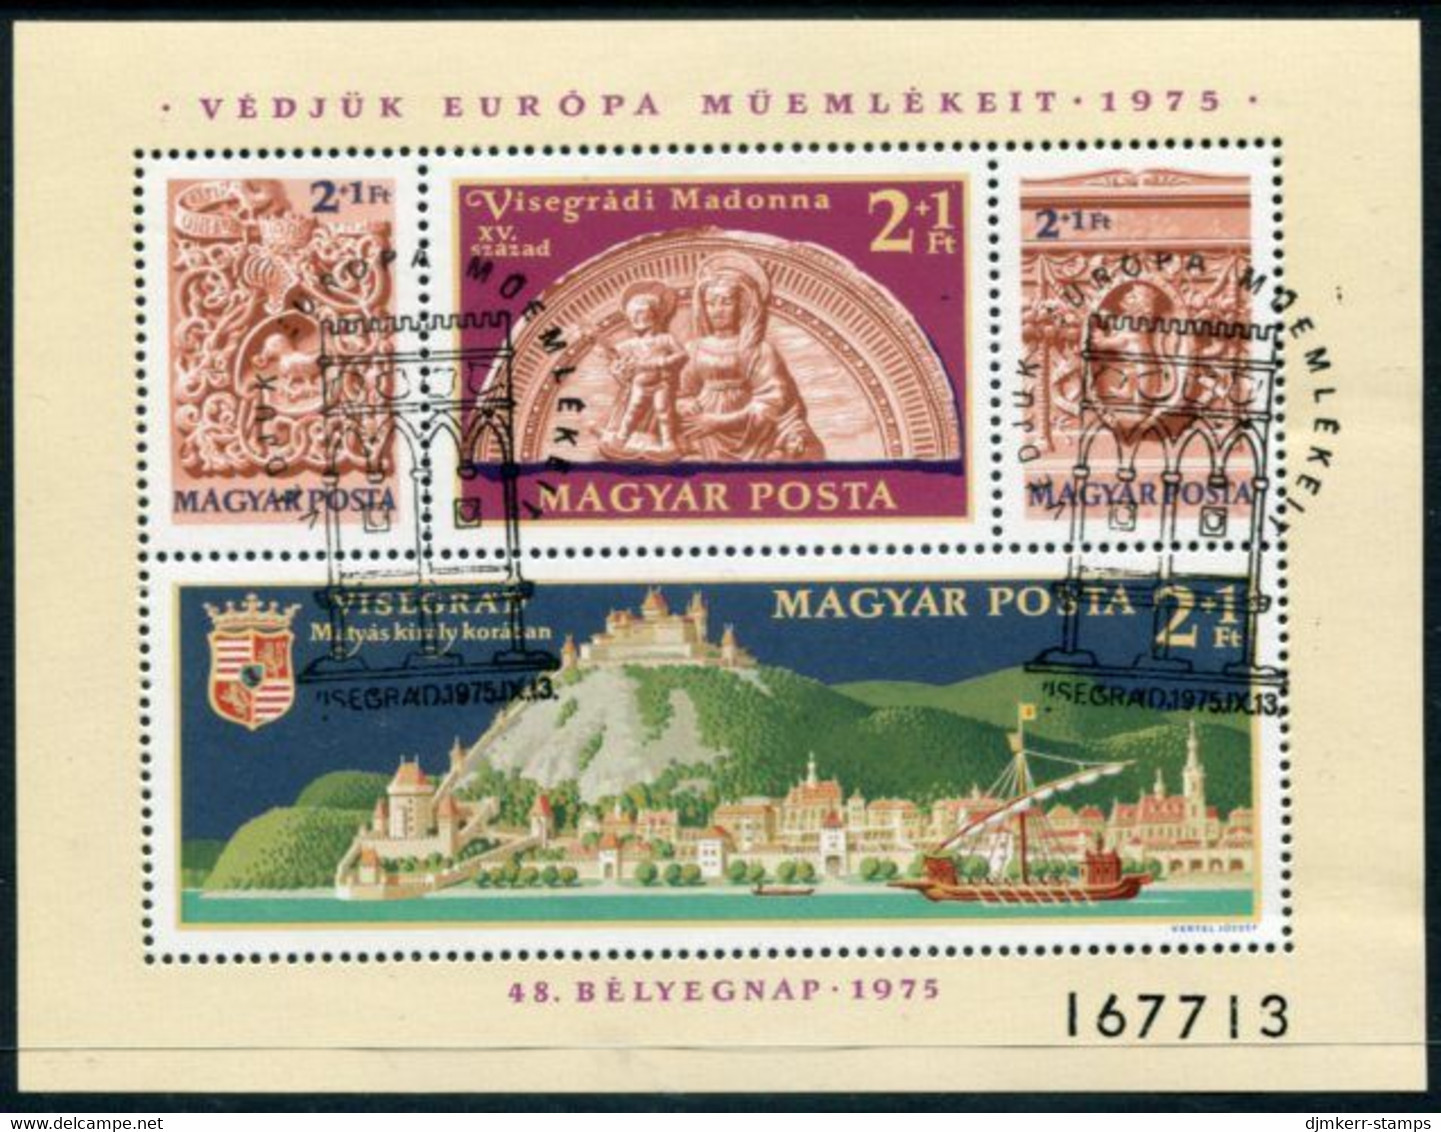 HUNGARY 1975 Stamp Day: Protection Of Monuments Block Used..  Michel Block 115 - Blocks & Kleinbögen